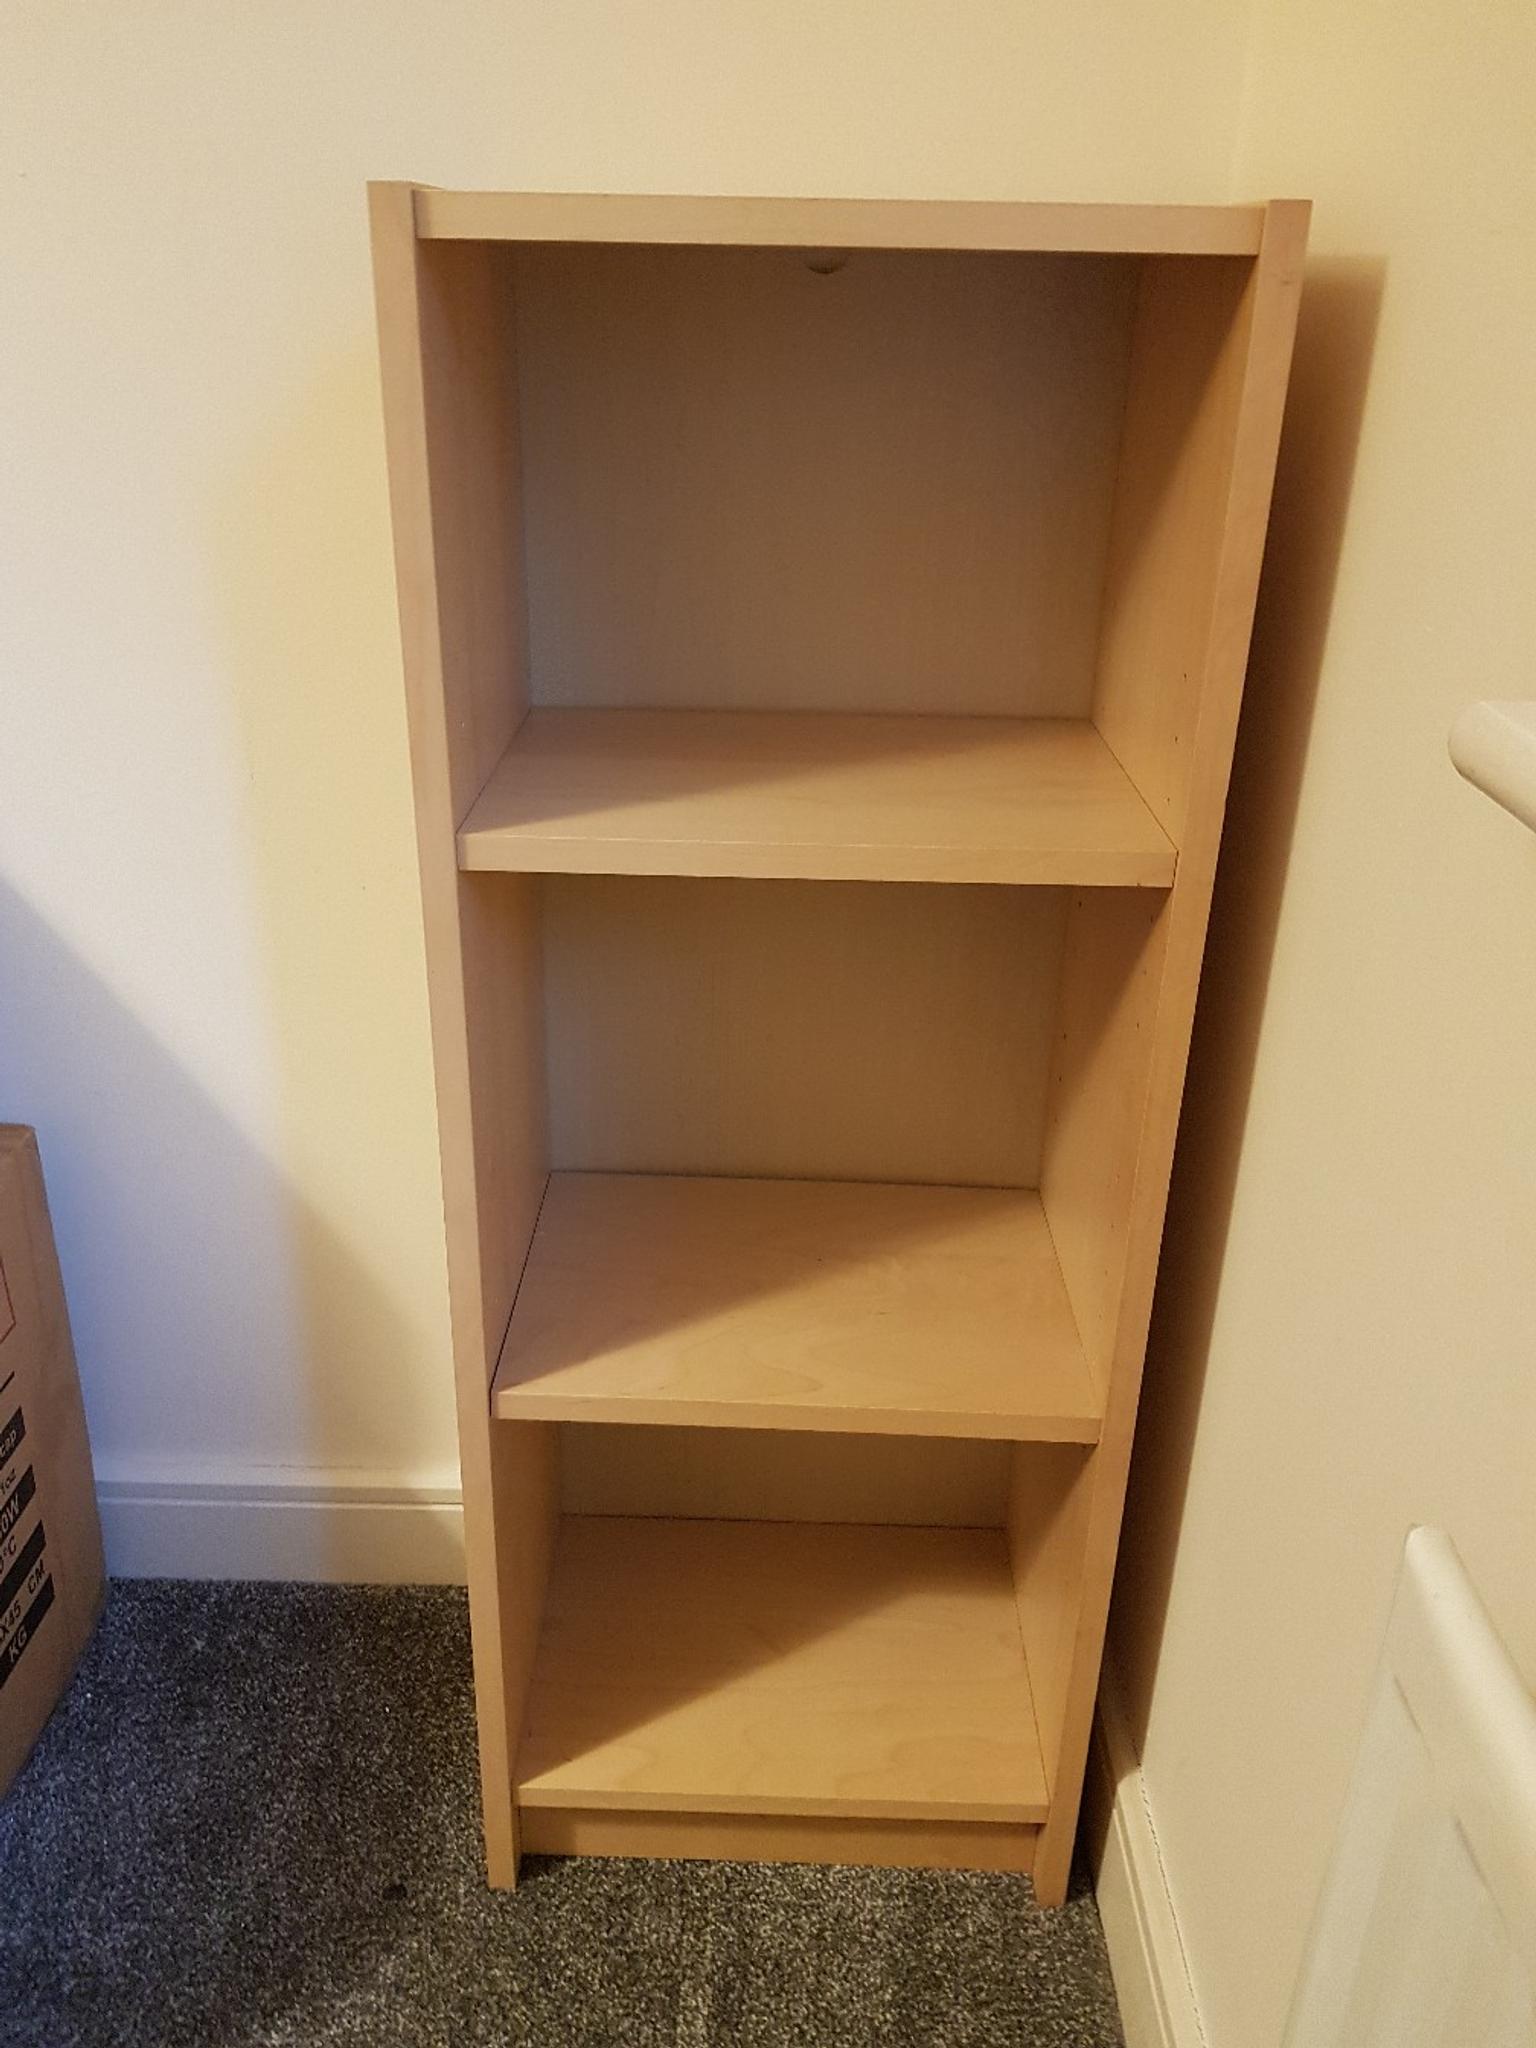 Ikea Tall Bookshelf Bookcase In Lu2 Luton For 5 00 For Sale Shpock